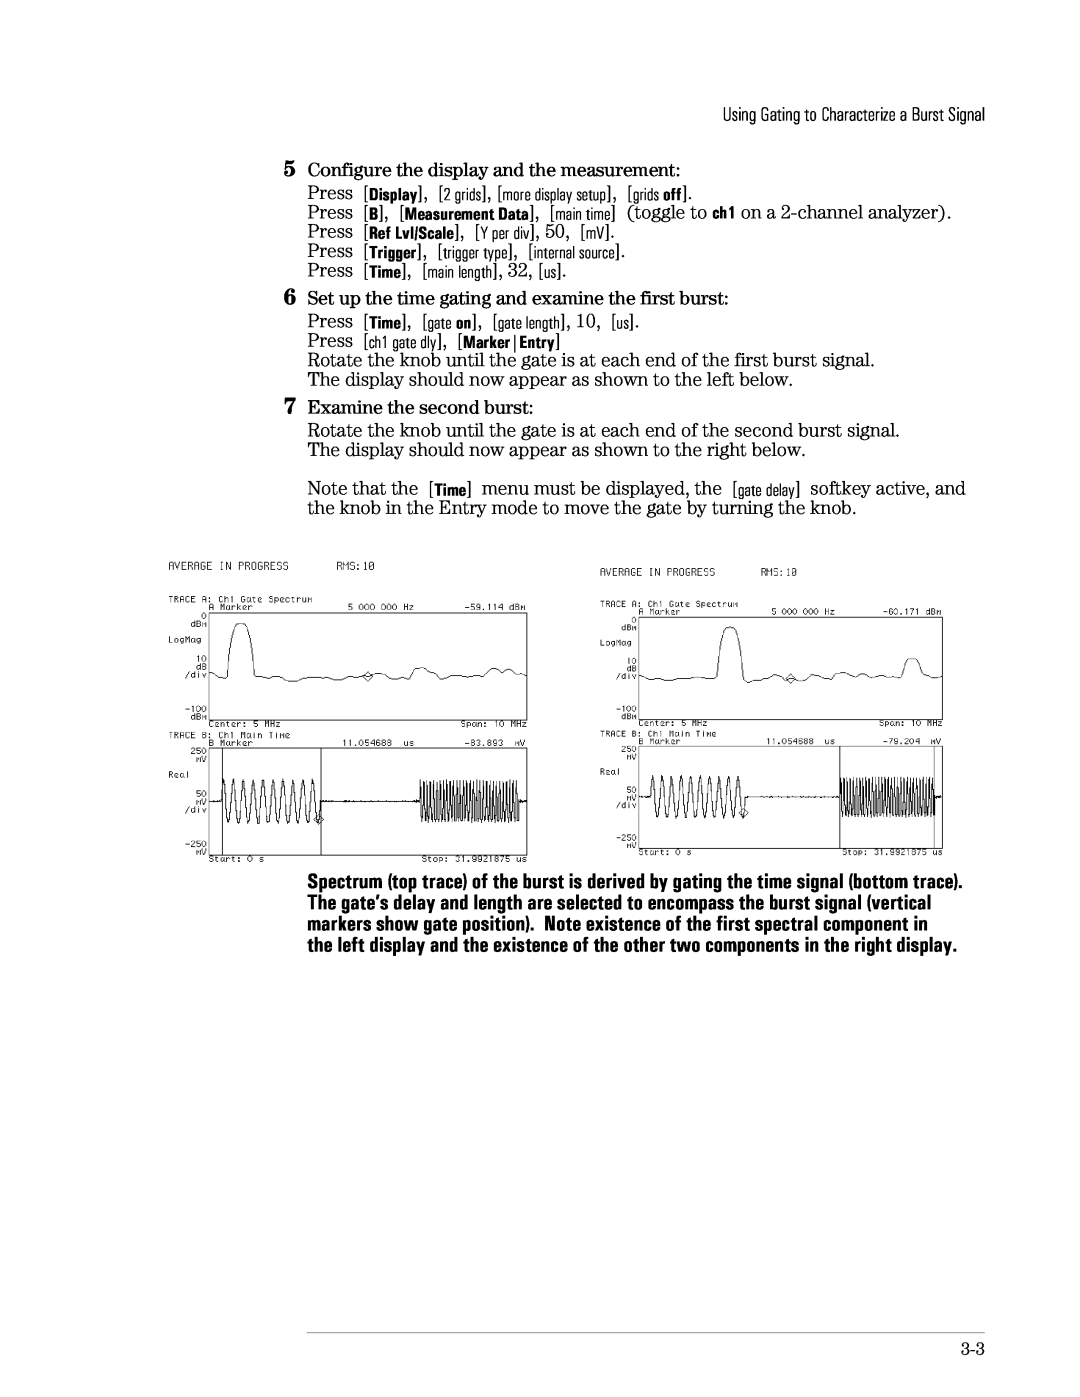 Agilent Technologies 89441A manual Using Gating to Characterize a Burst Signal, 5Configure the display and the measurement 